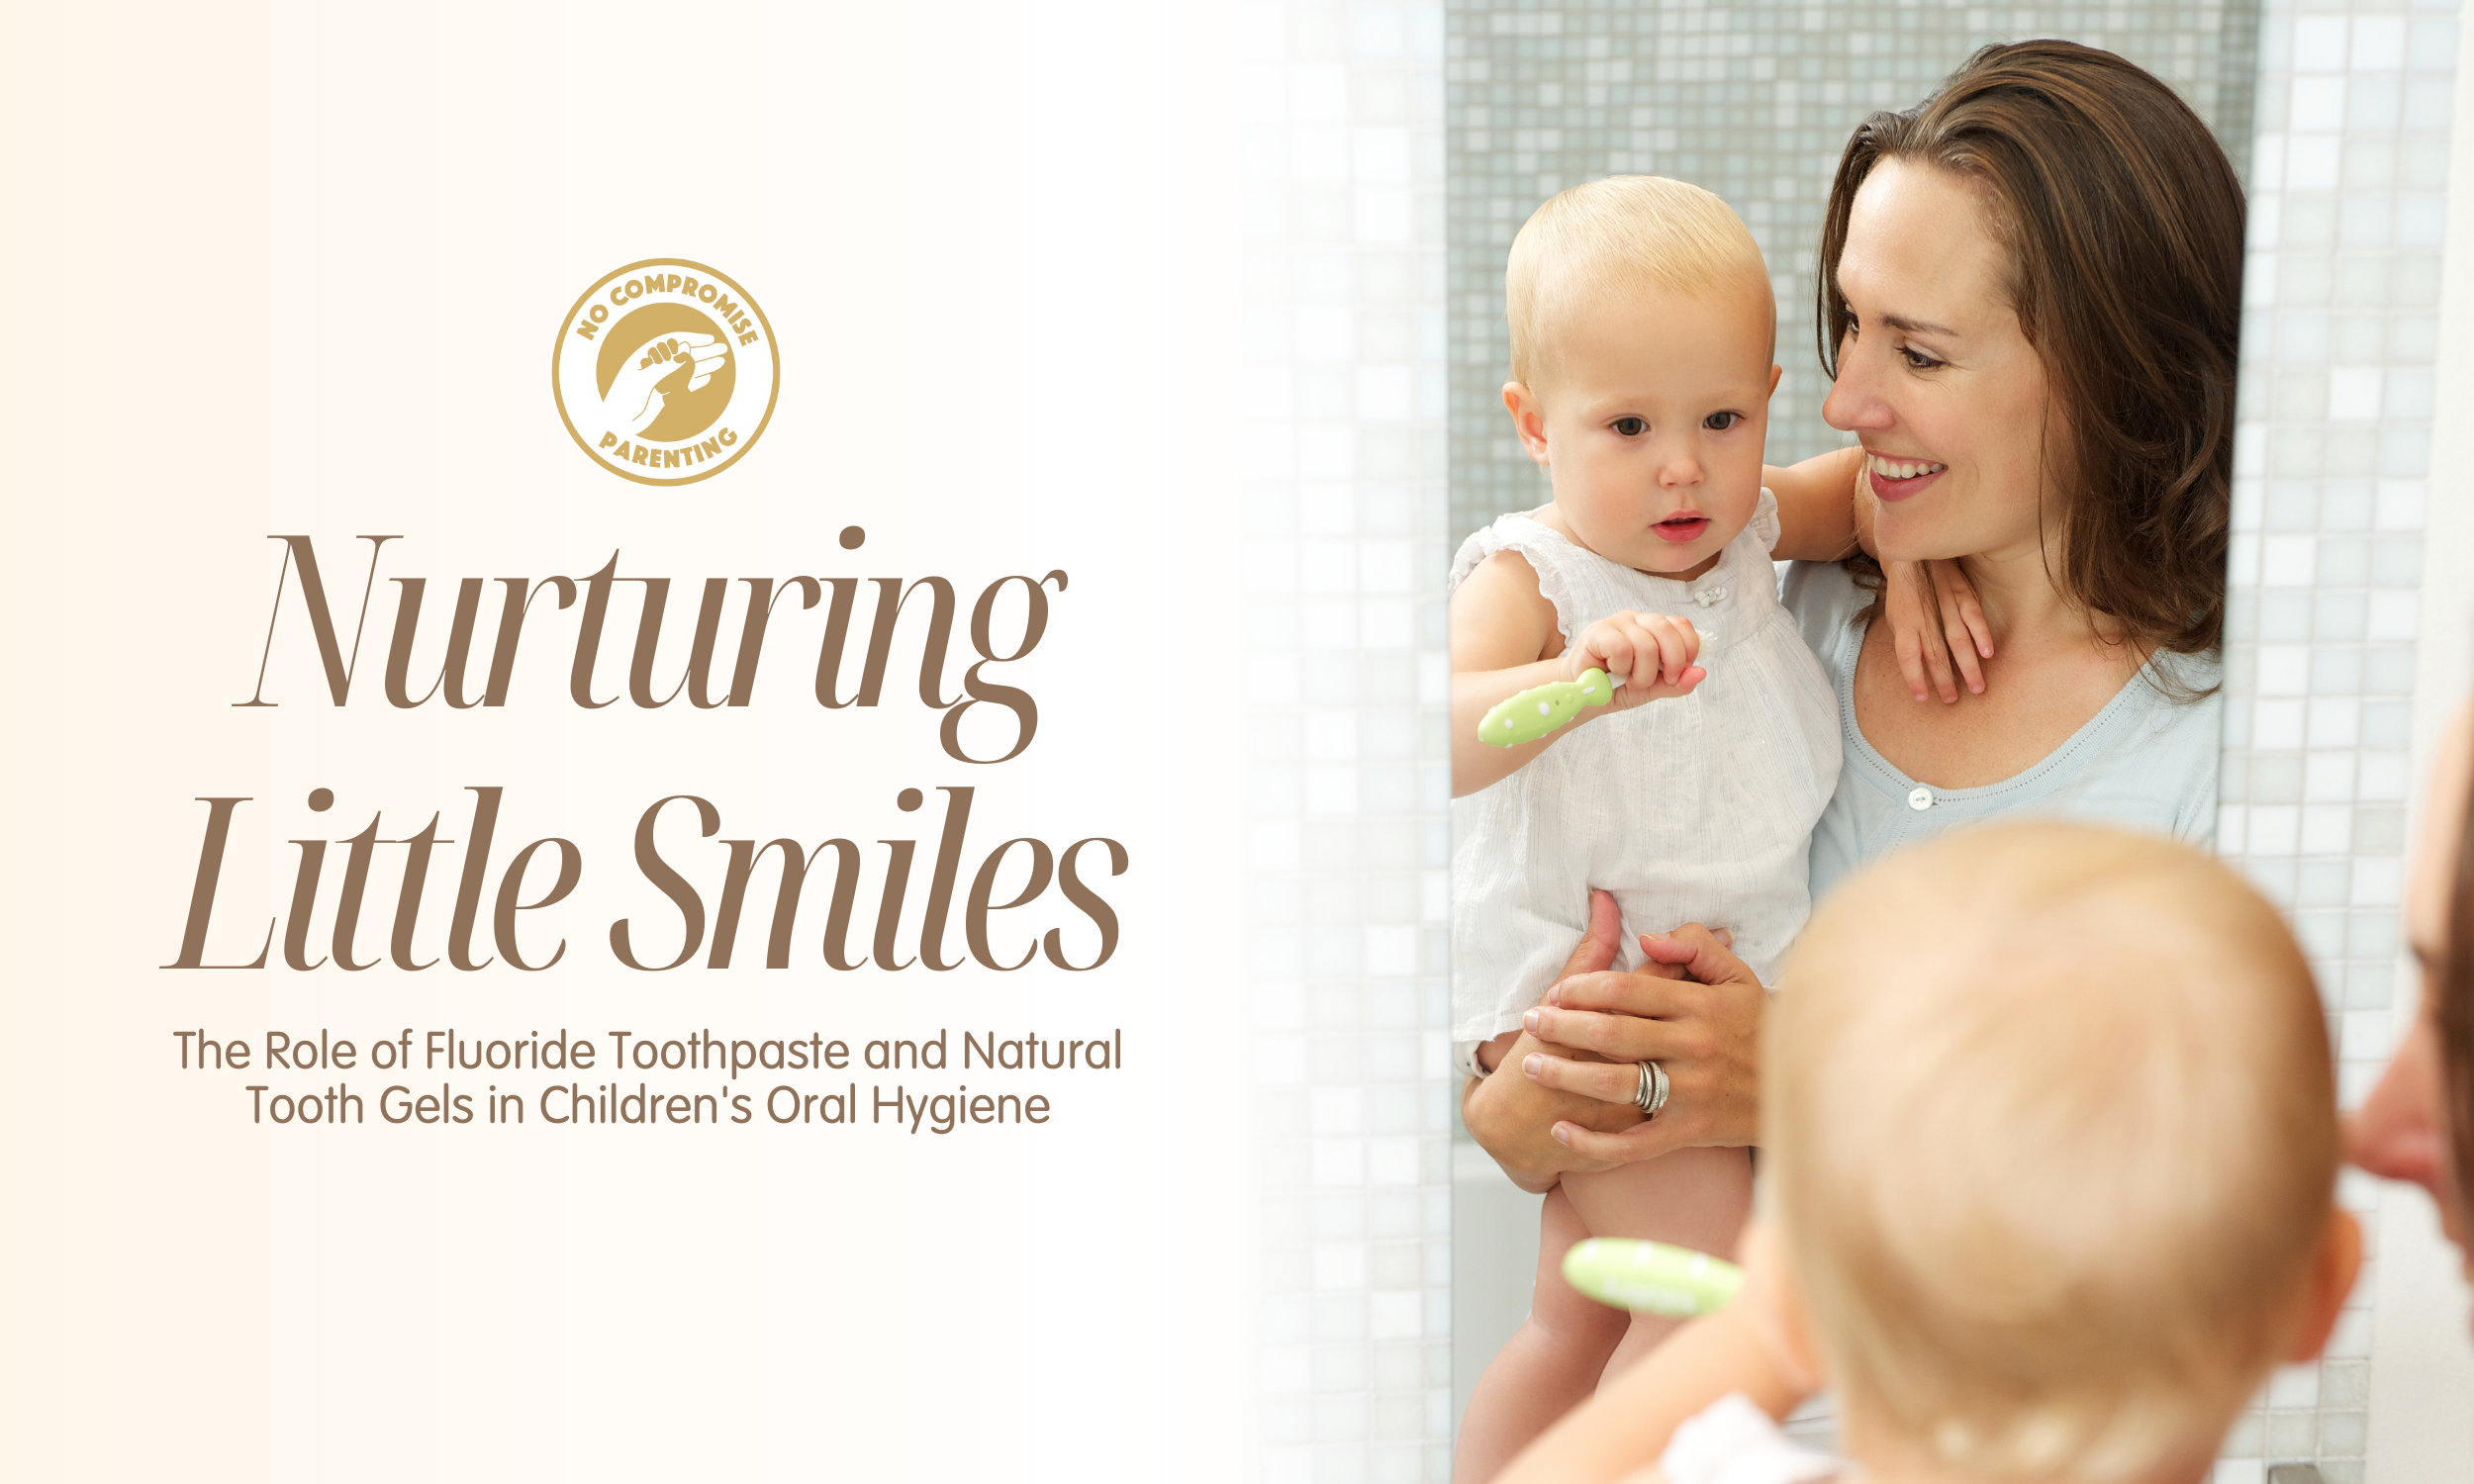 Nurturing Little Smiles: The Role of Fluoride Toothpaste and Natural Tooth Gel in Children's Oral Hygiene